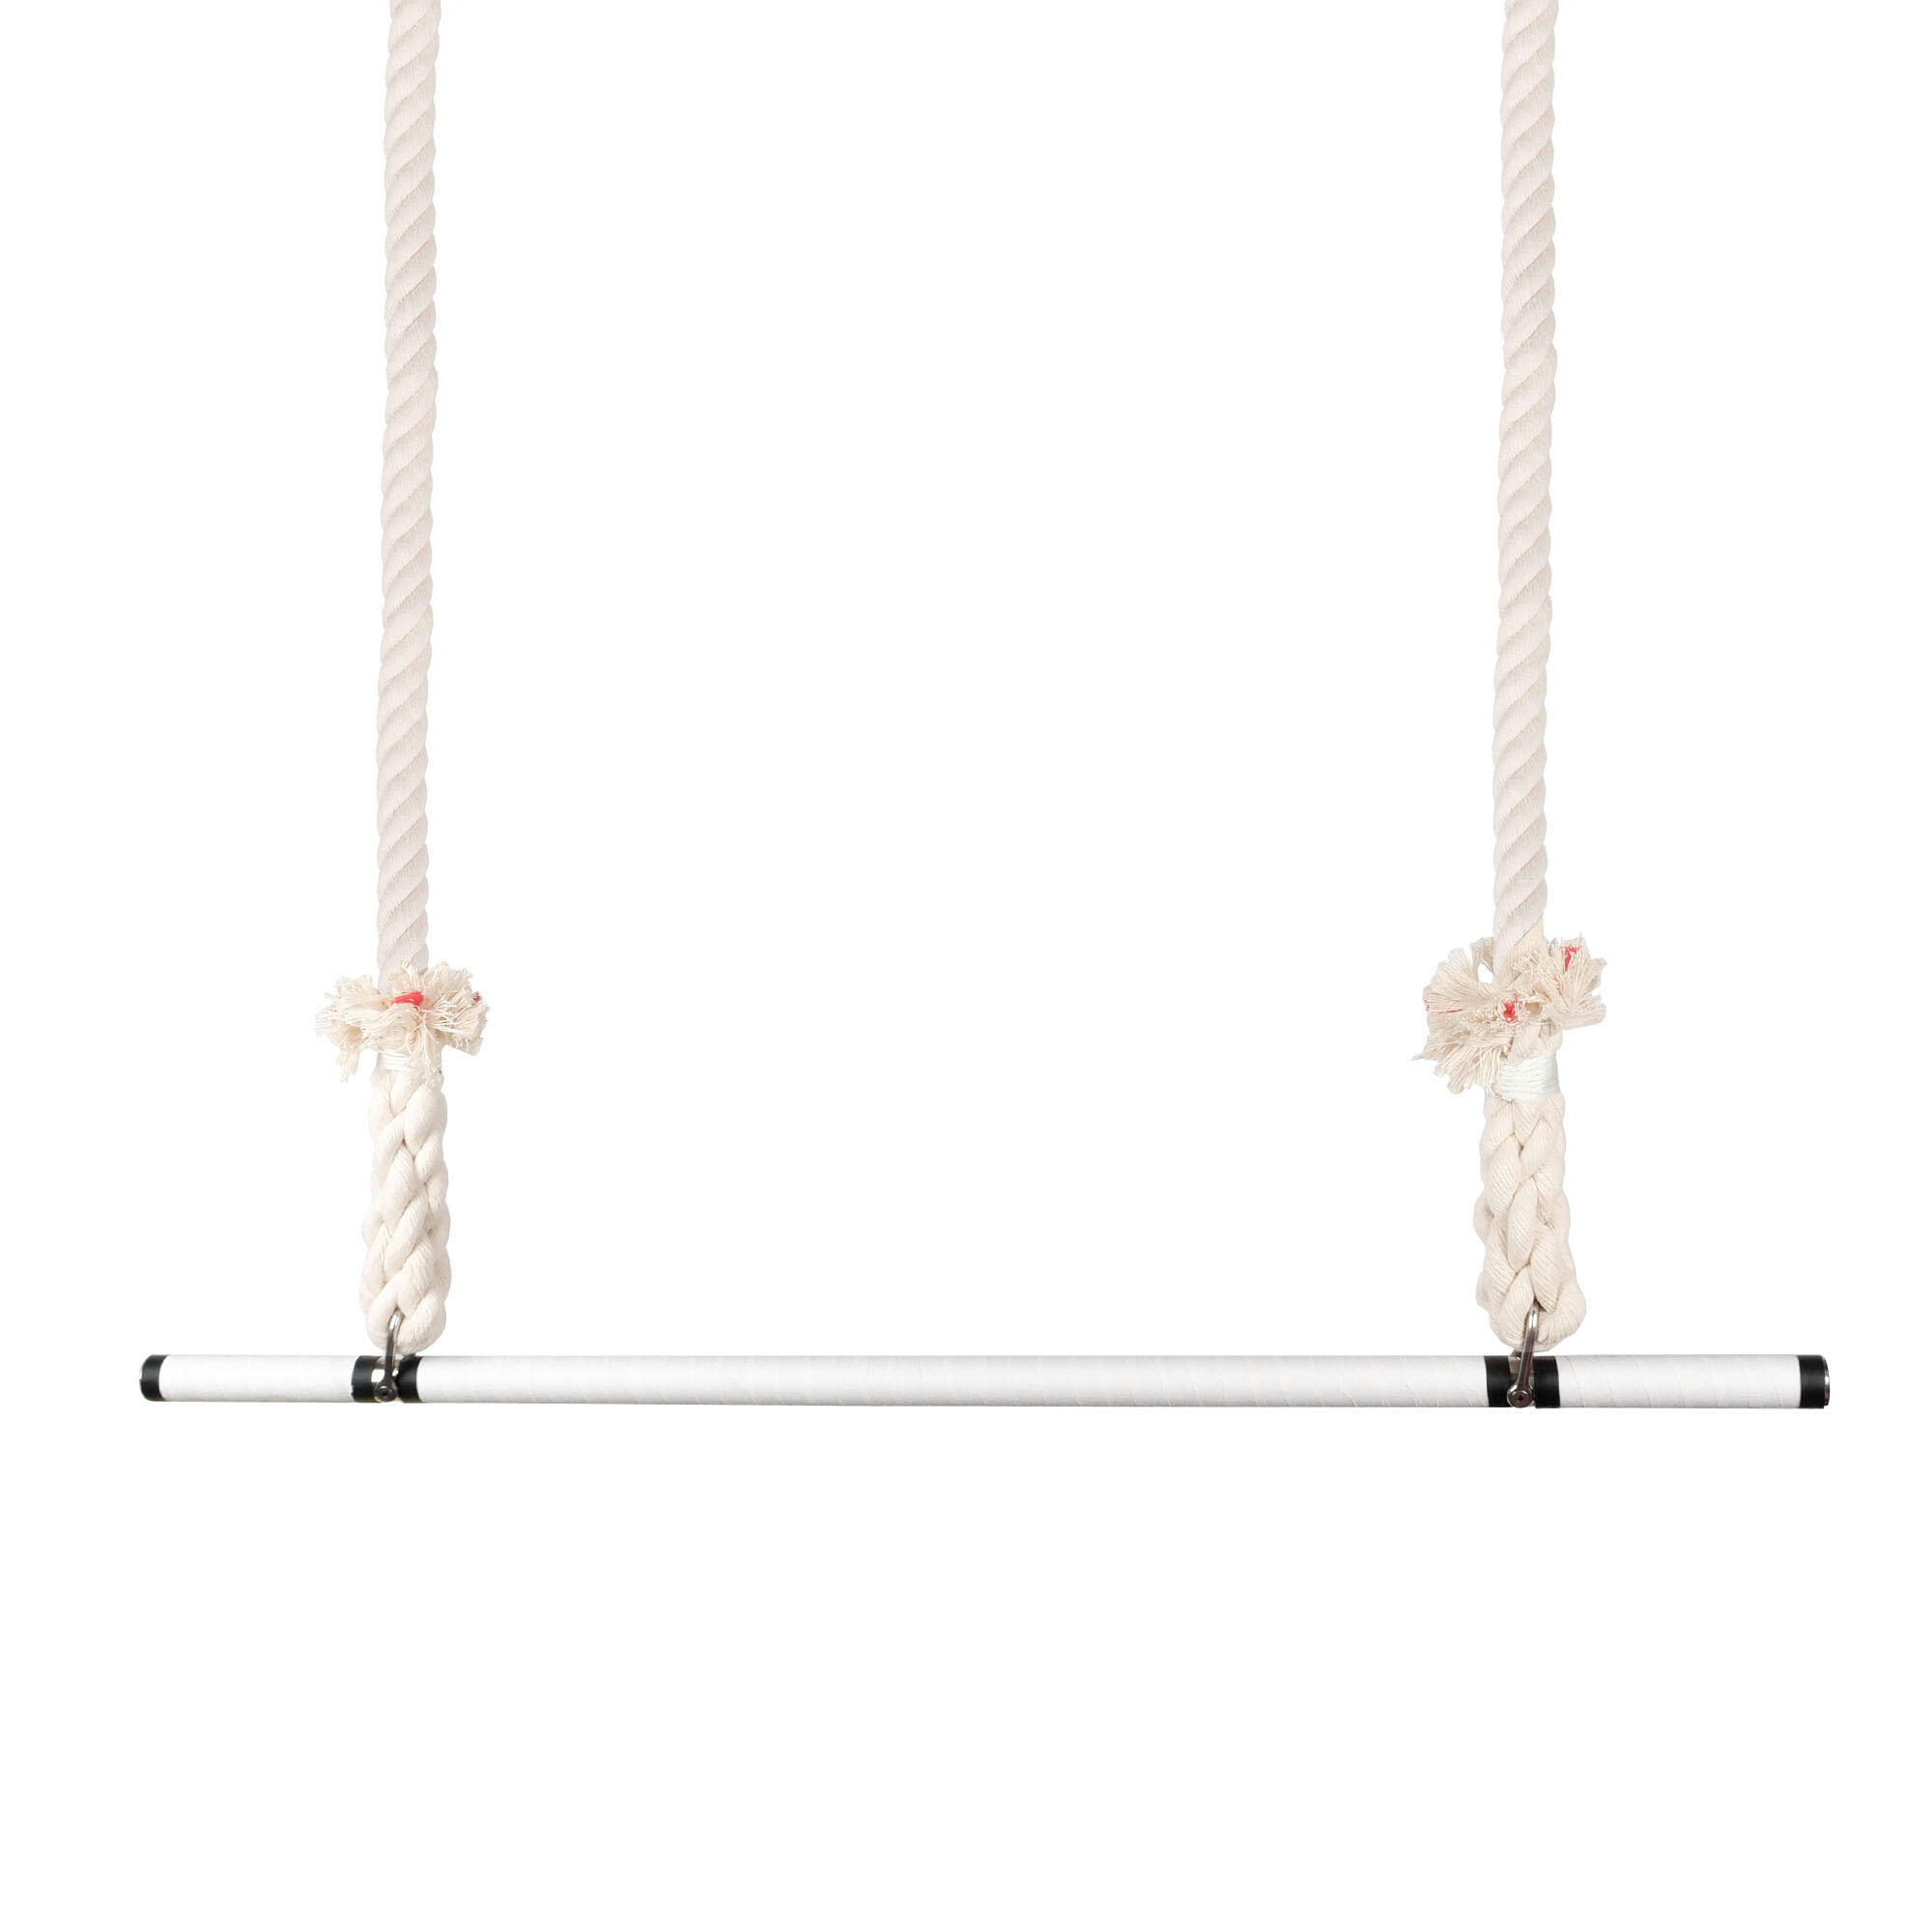 Prodigy Dyna-Core Shackle Extended Trapeze -White 2/5